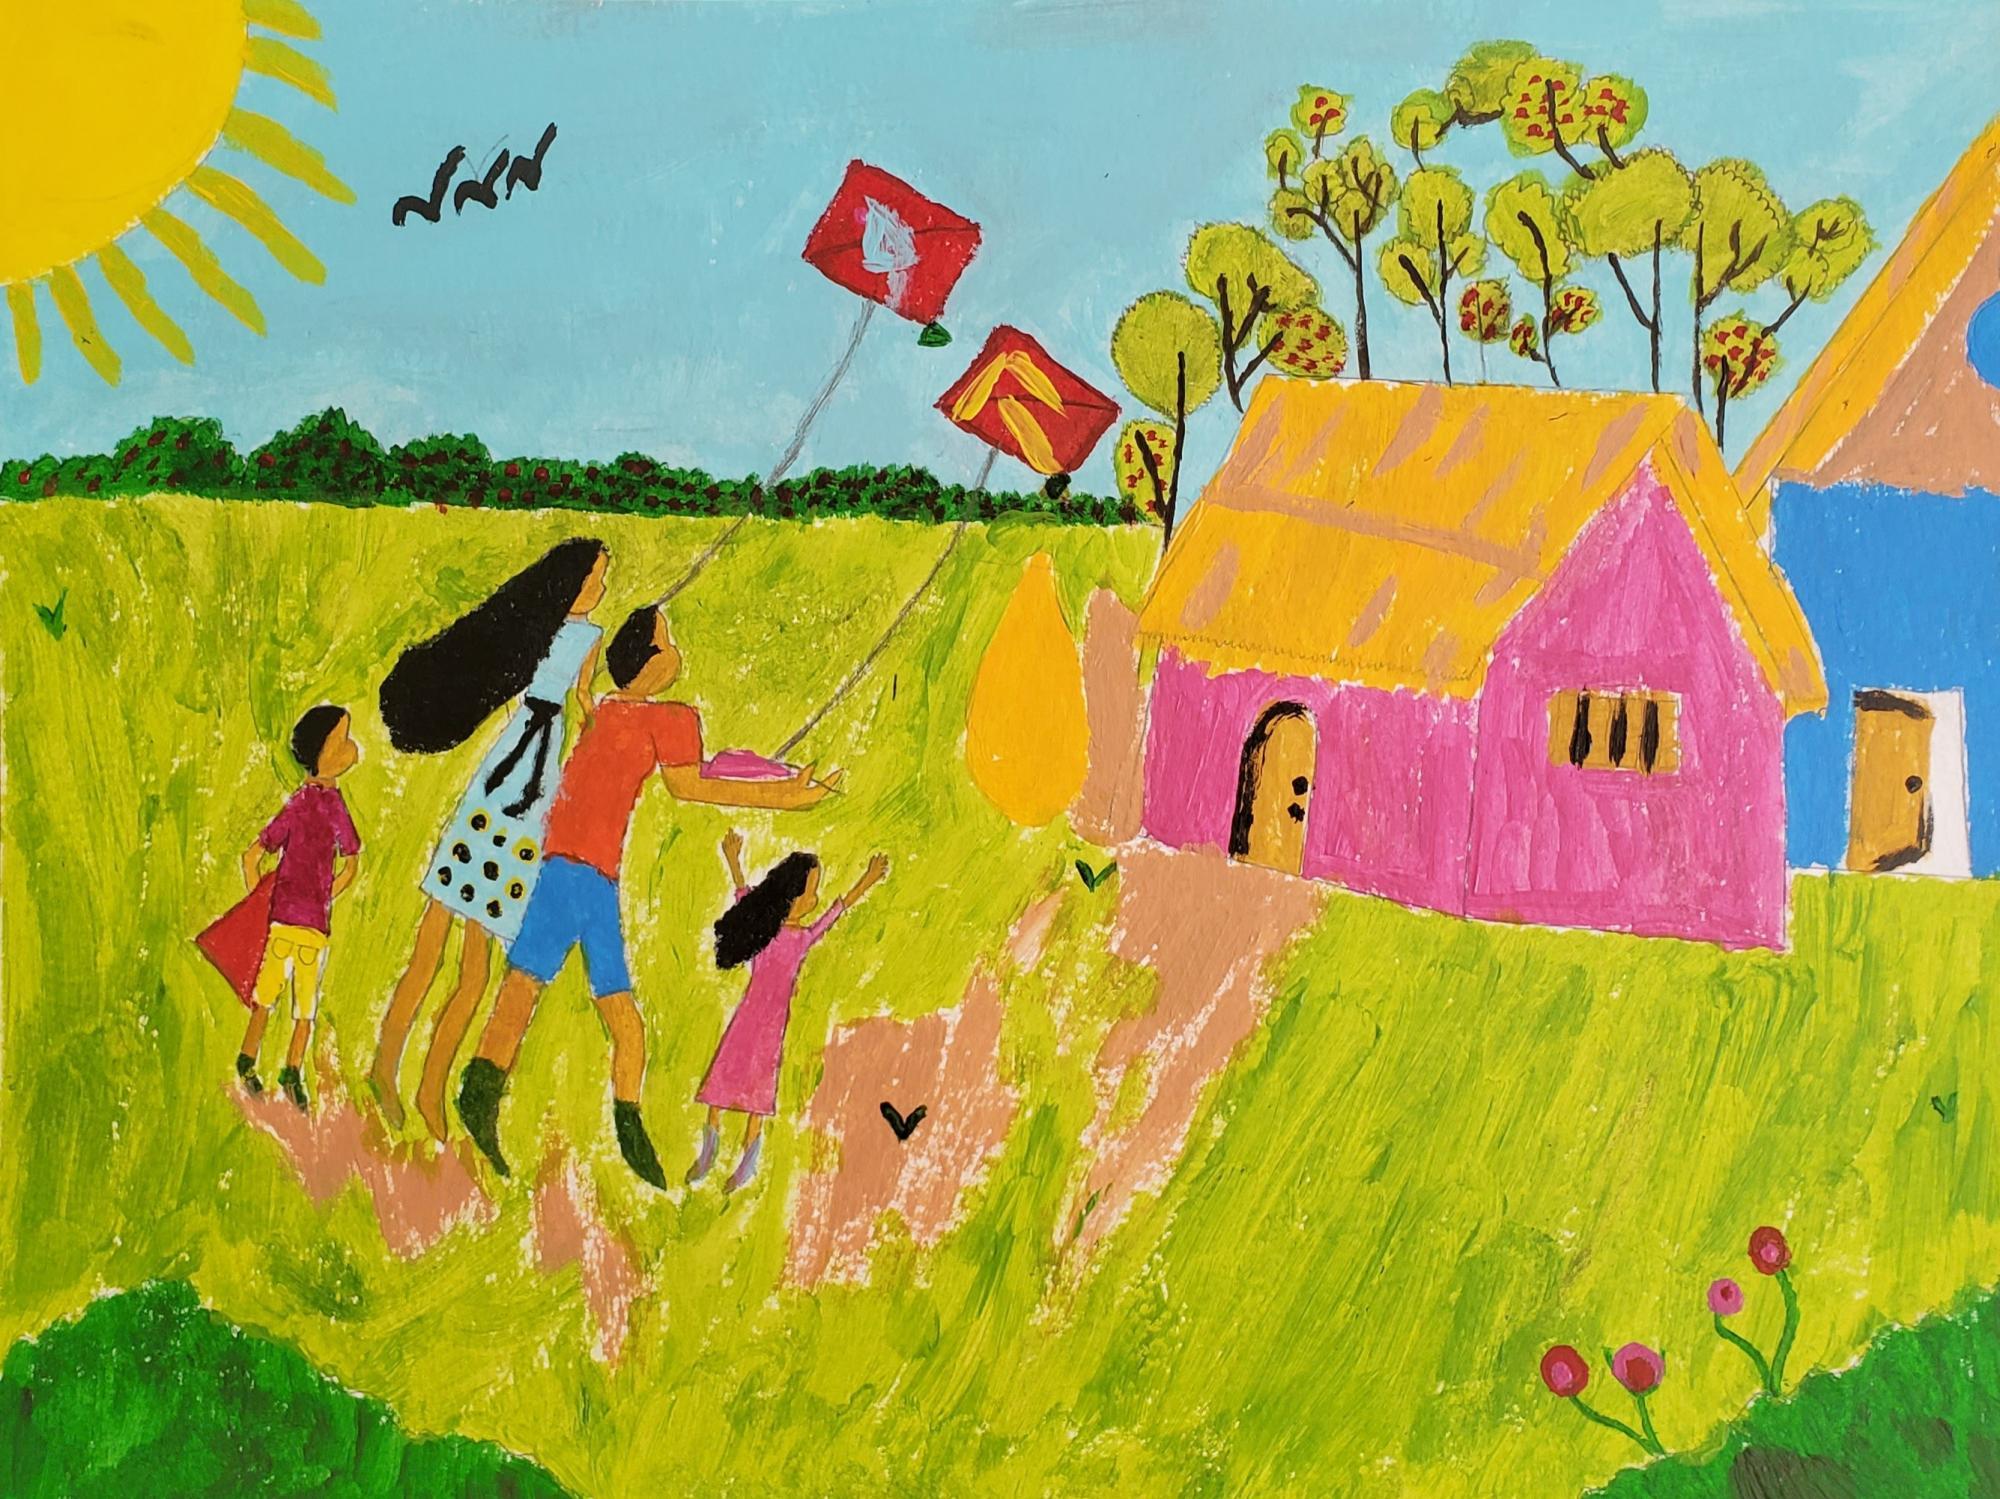 A scenic picture of four kids flying their kites in an open field. In the background you can see their houses and some berry bushes.